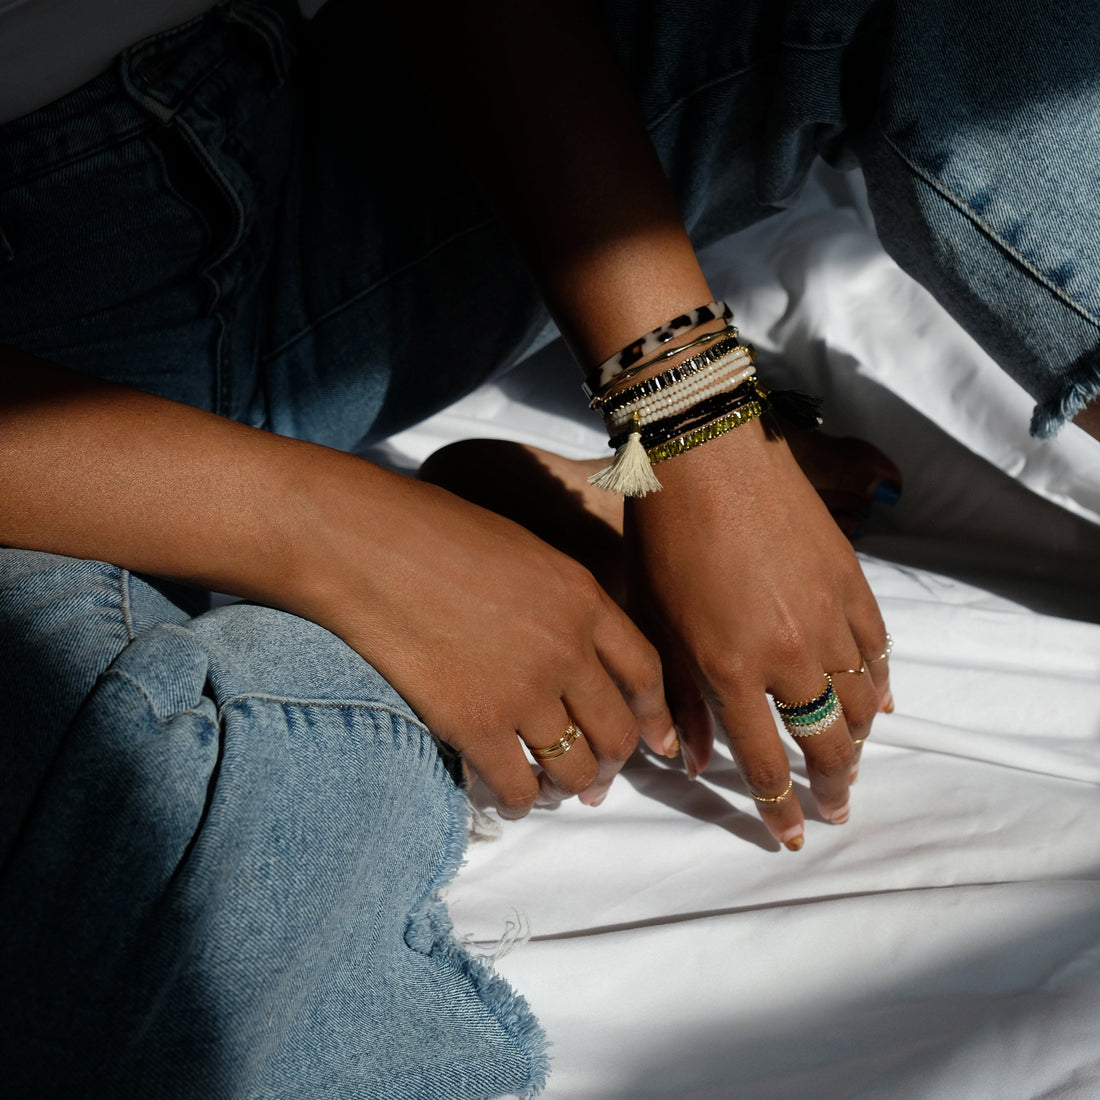 Victoria from @thevicstyles Styles our FW19 Jewelry Collection